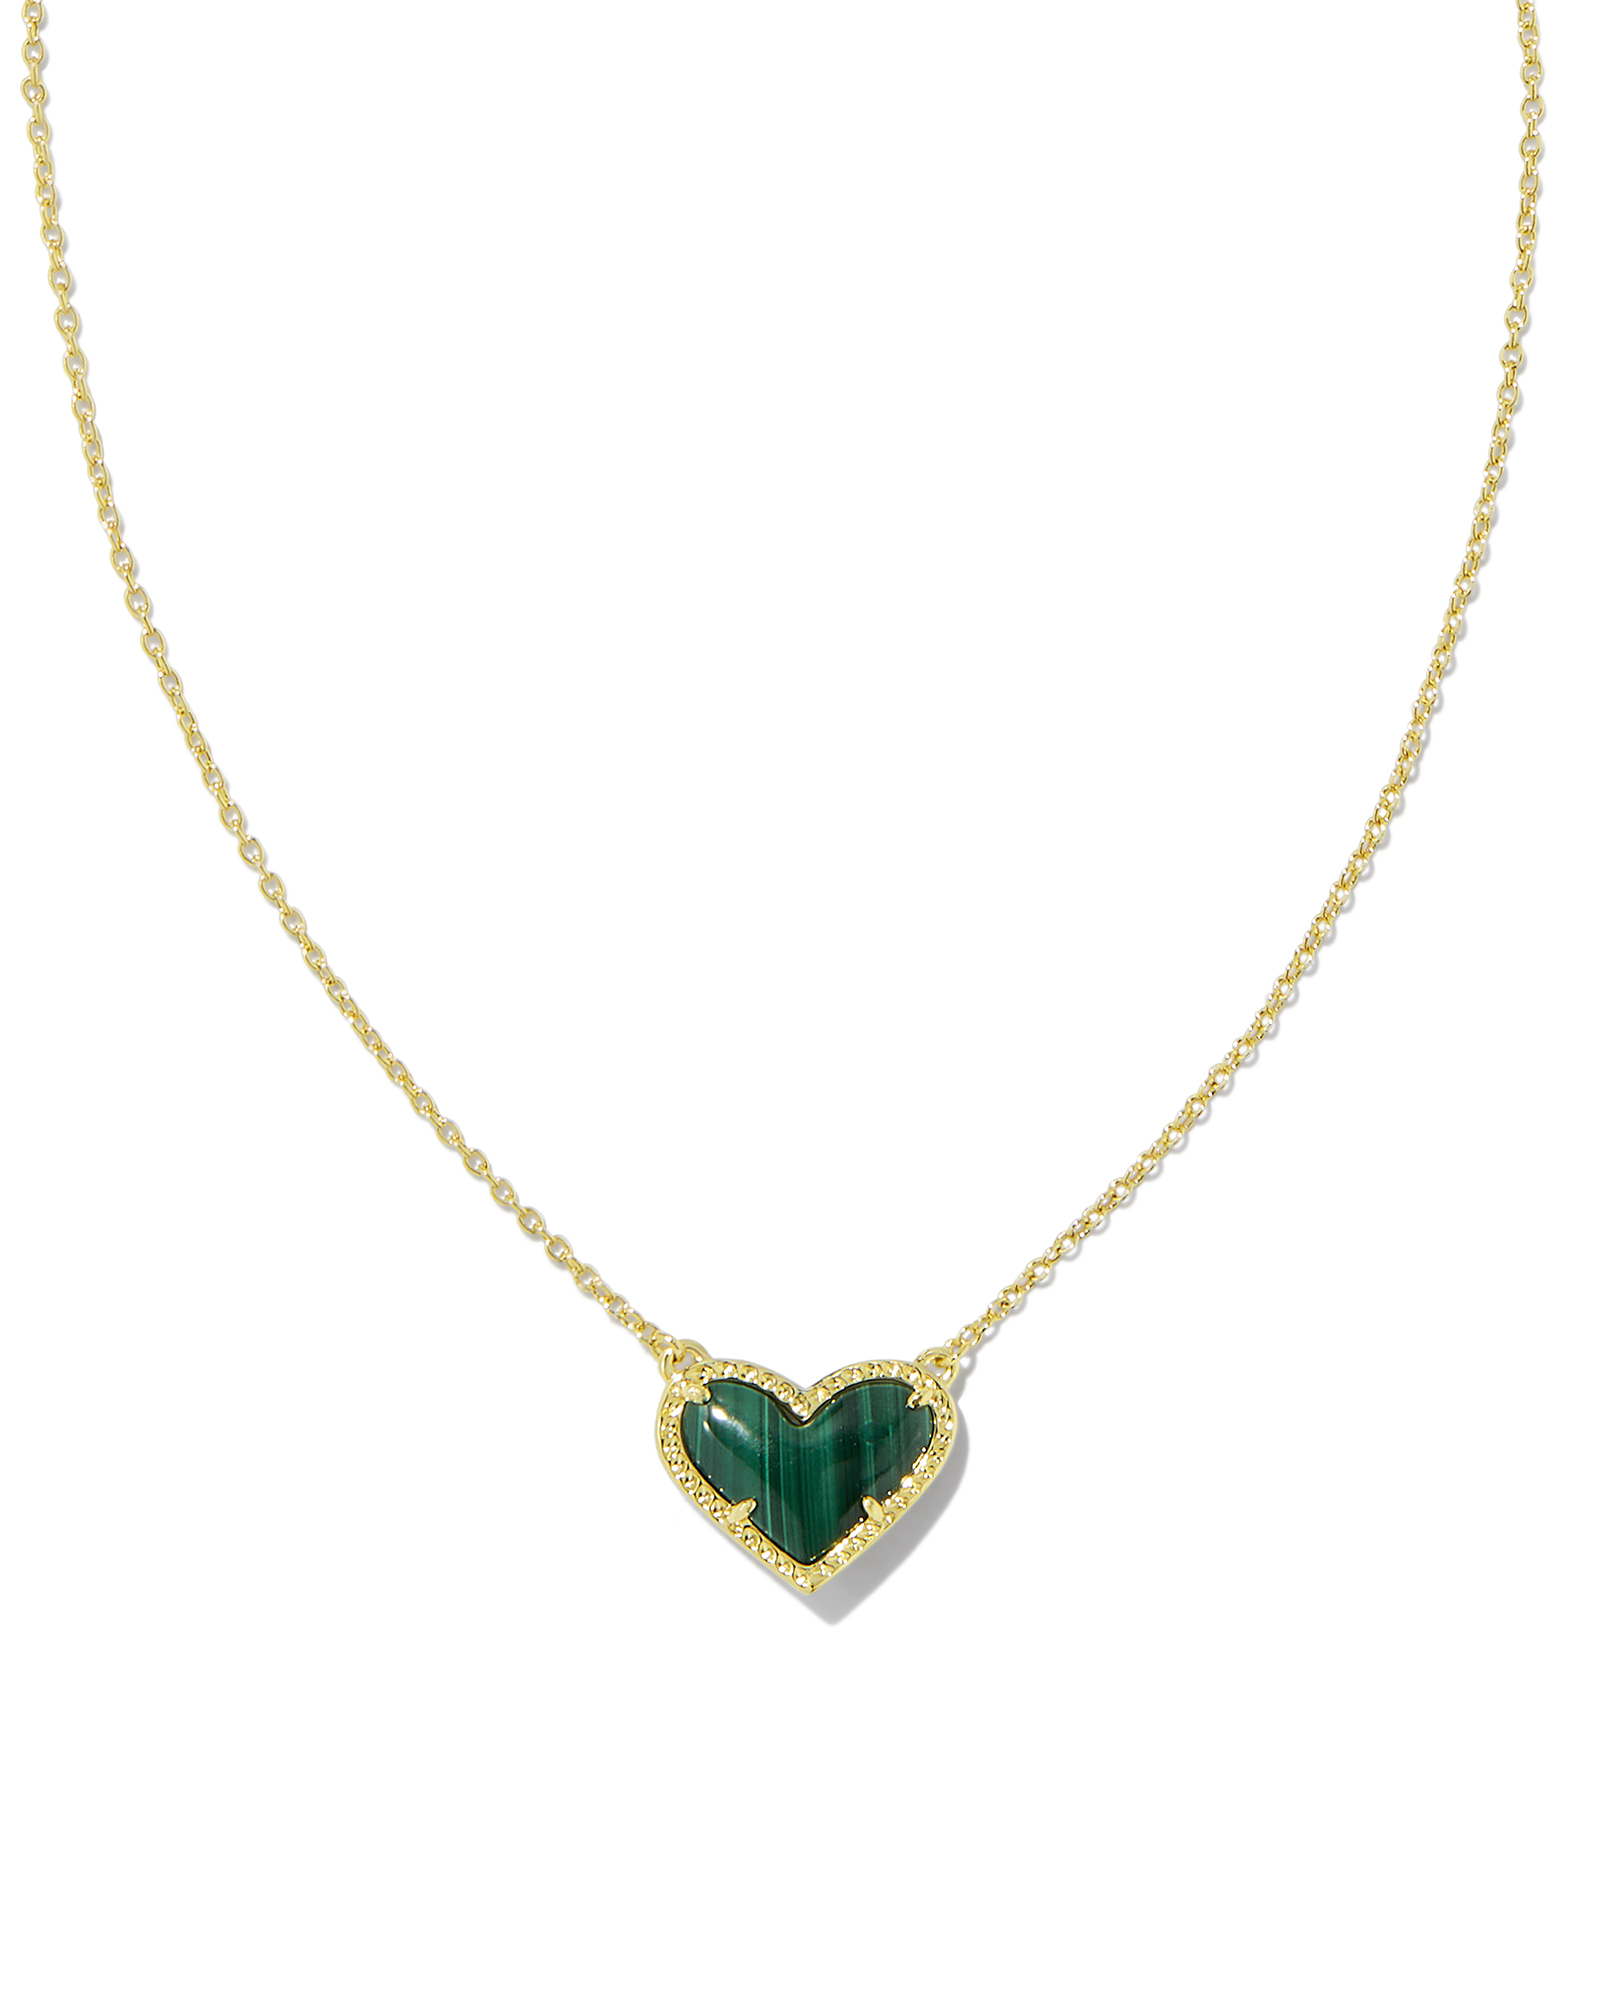 Relationship” Malachite Heart pendant, manmade malachite necklace, luxury  gift for her – Crystal boutique